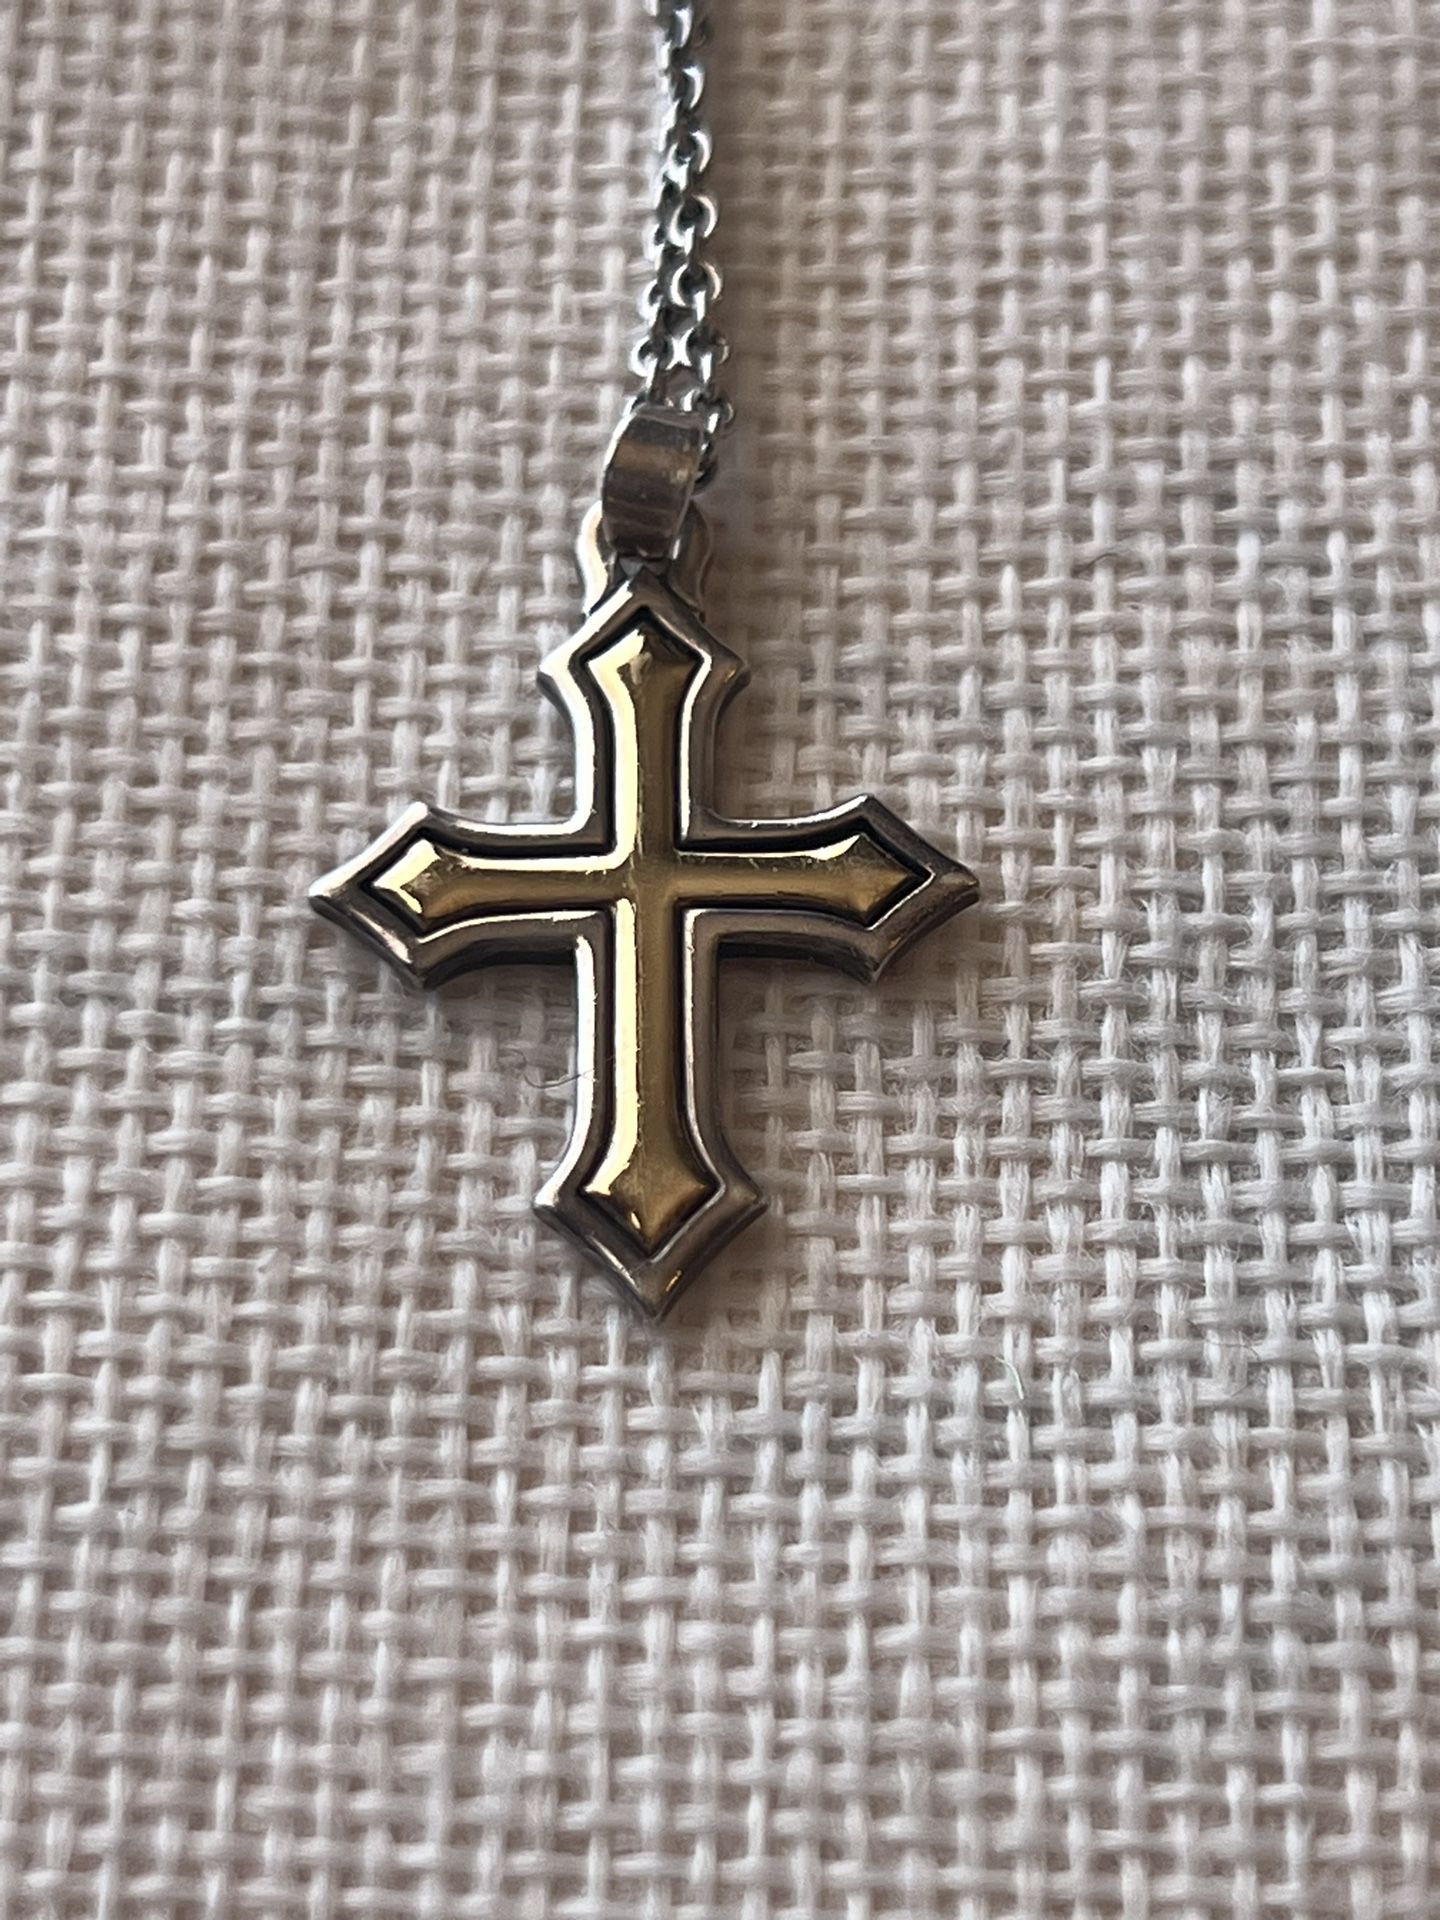 JAMES AVERY RETIRED PASSION CROSS STAMPED SILVER AND 18kt Gold With 16” Silver James Avery Chain 